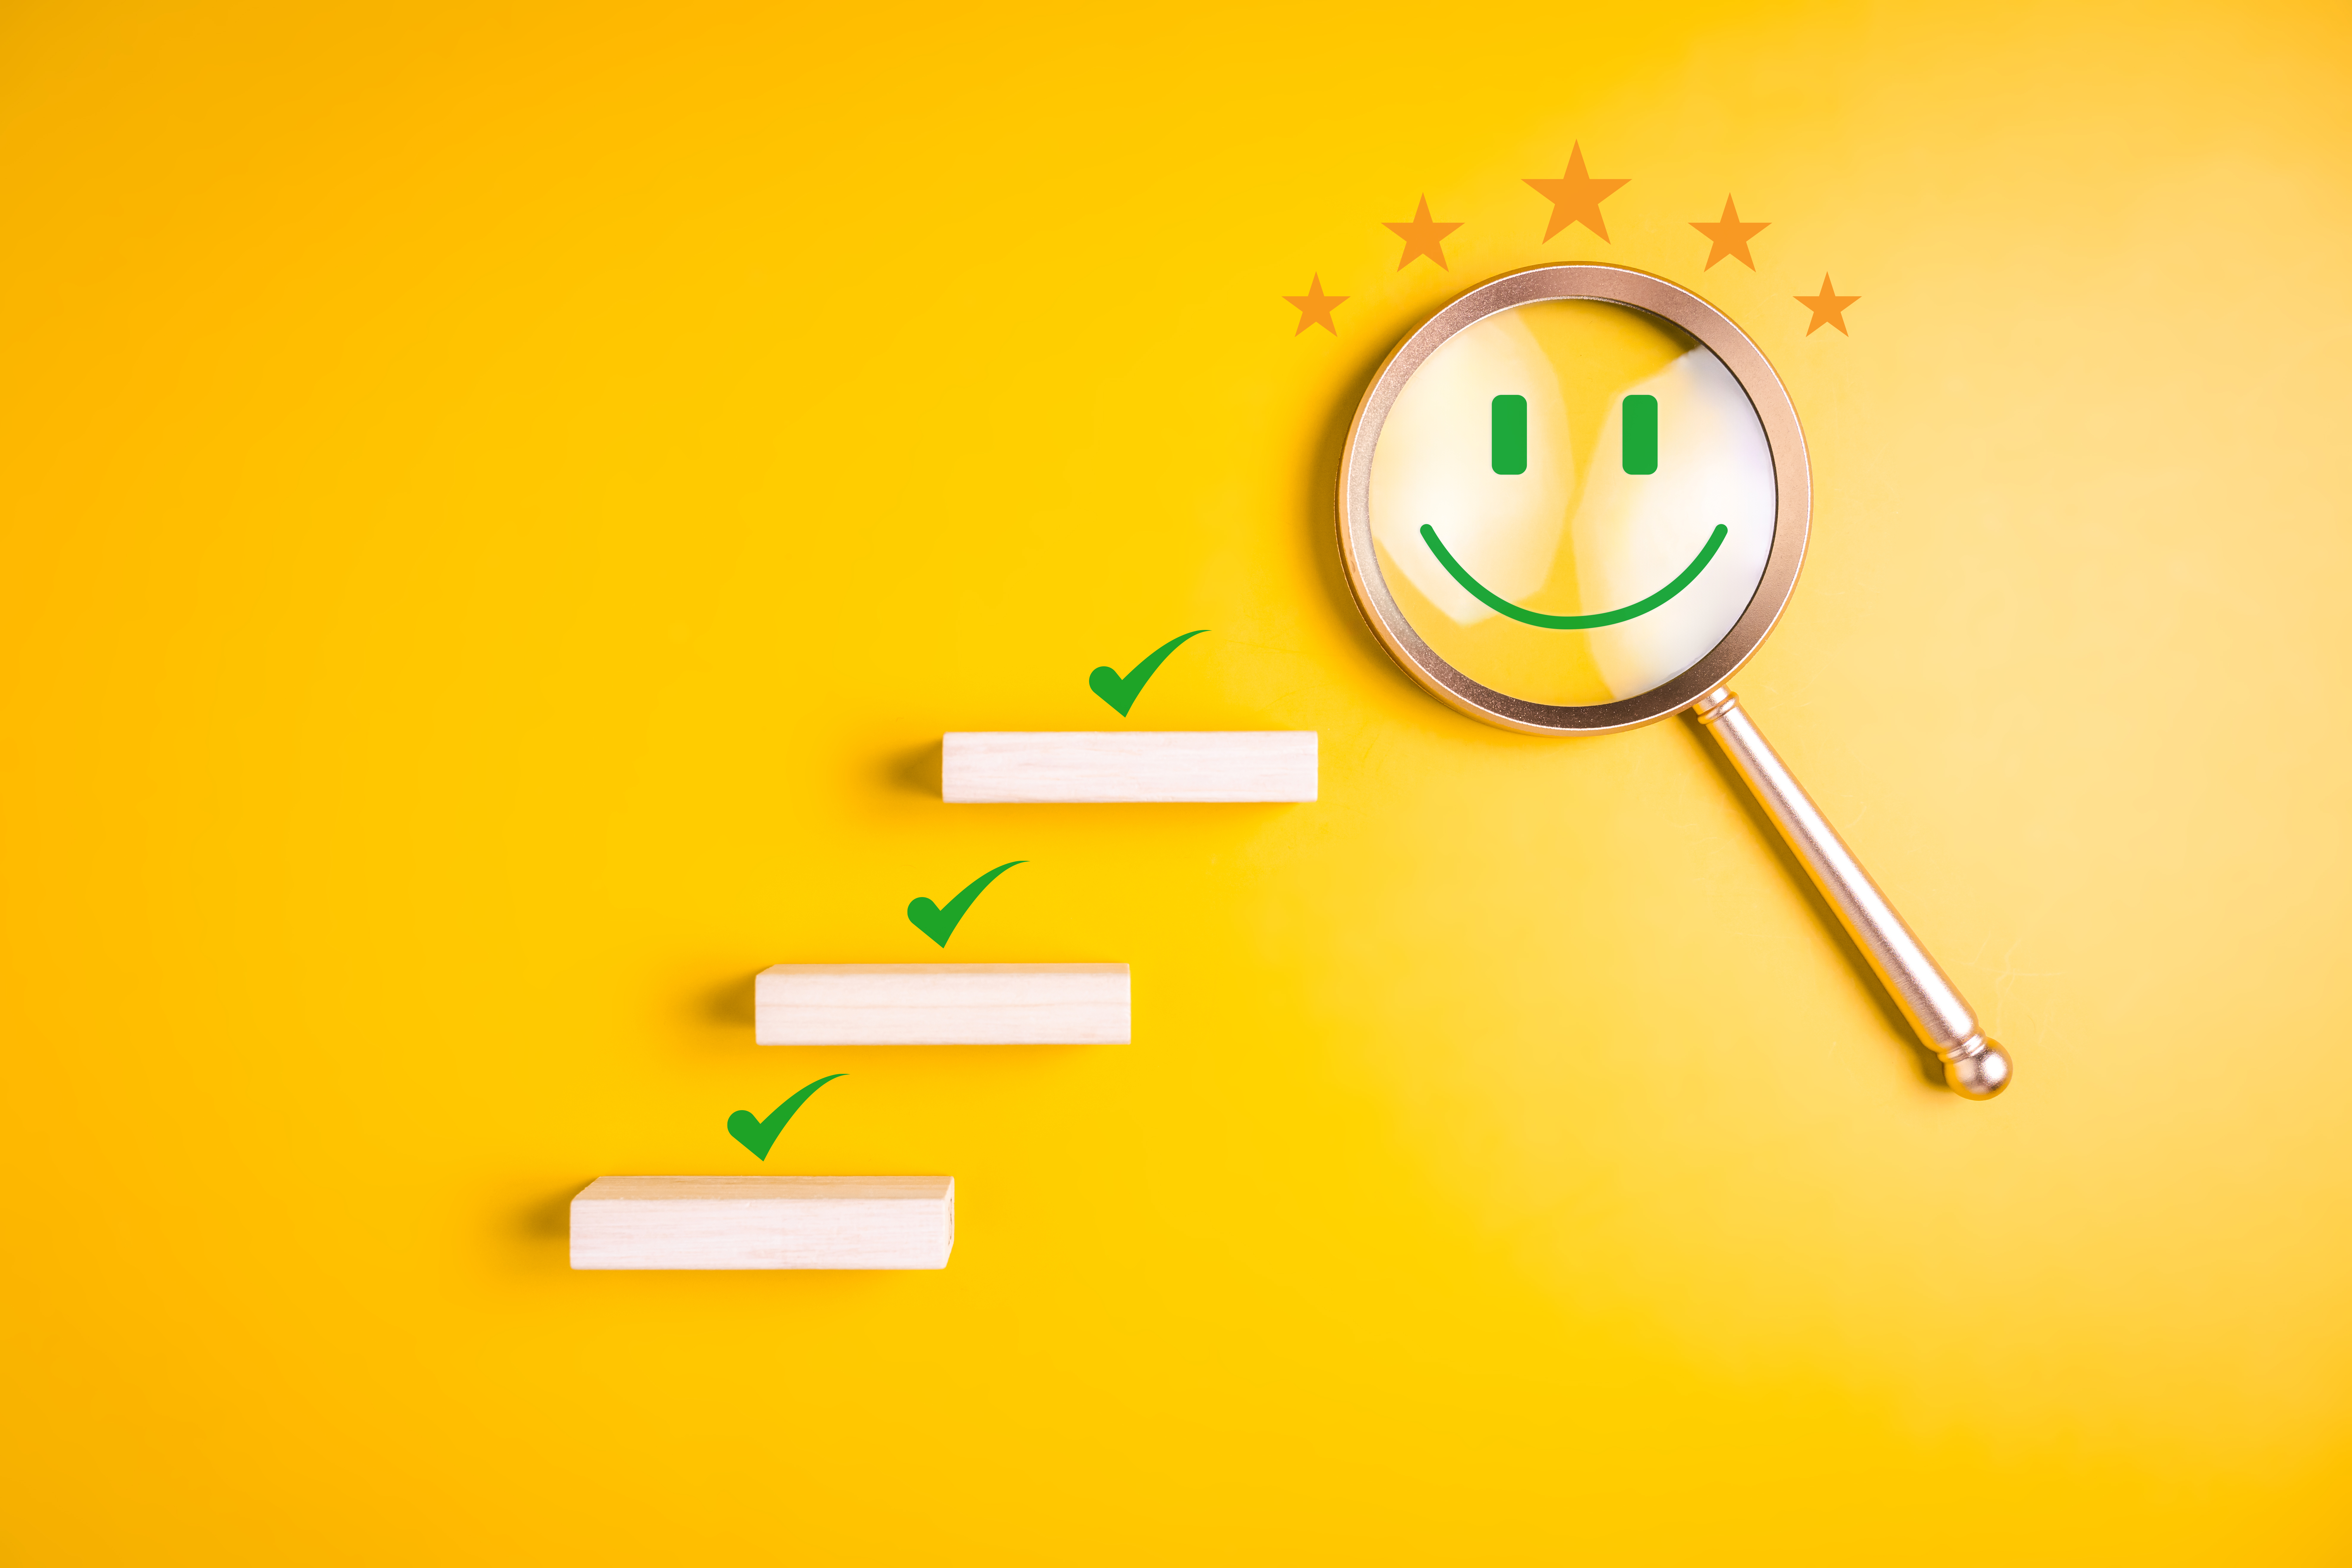 Smiling face and check mark icons for quality control and certificate guarantee